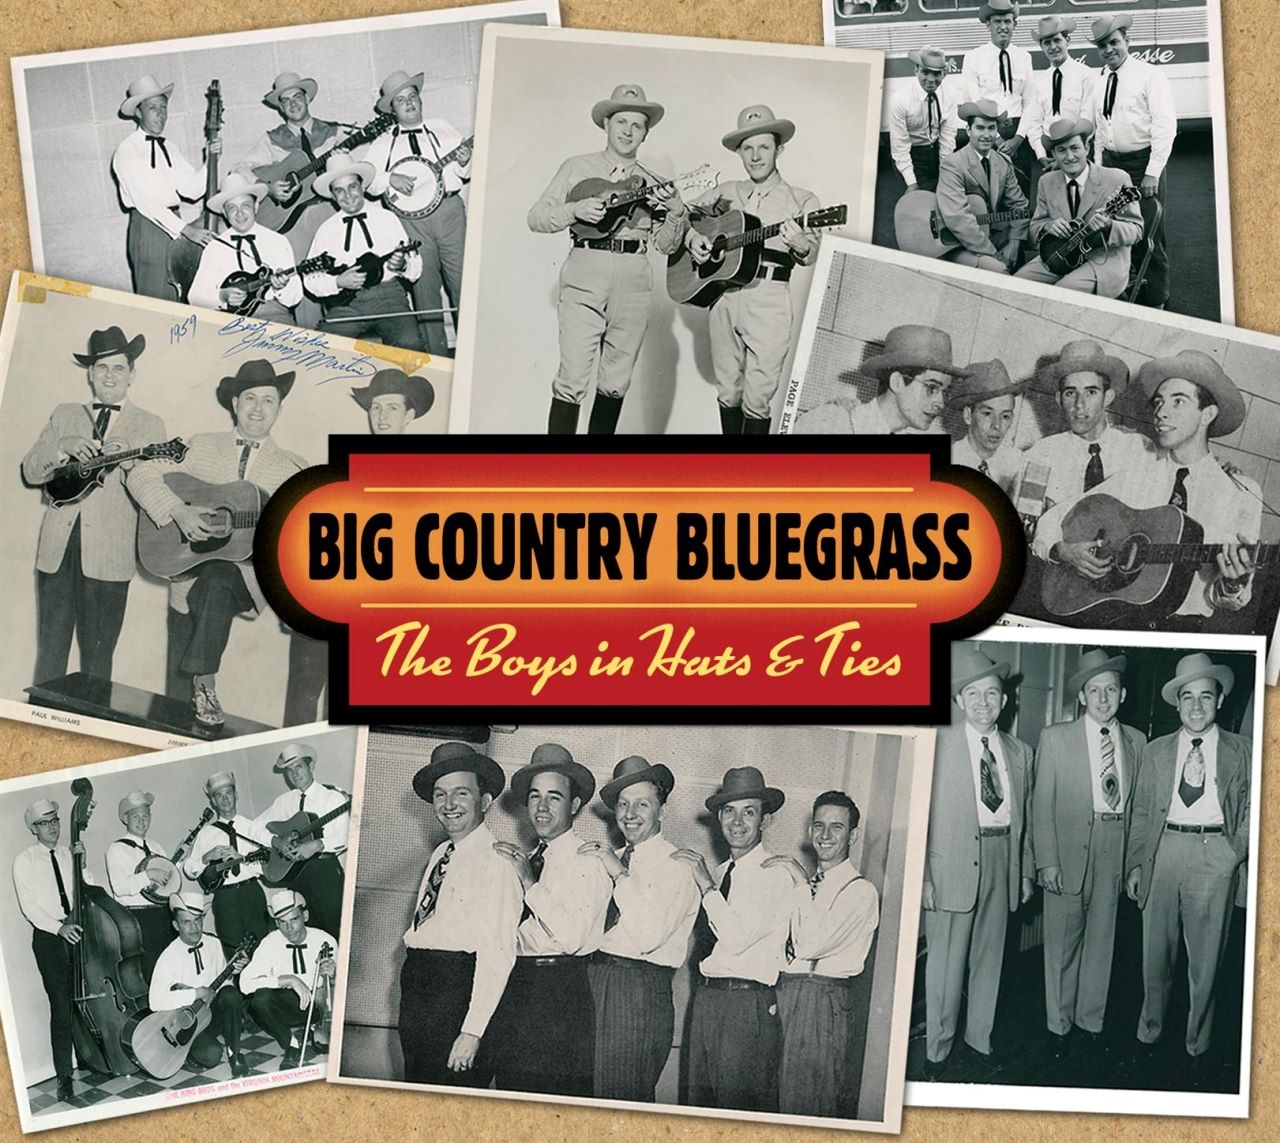 Big Country Bluegrass - The Boys In Hats & Ties cover album